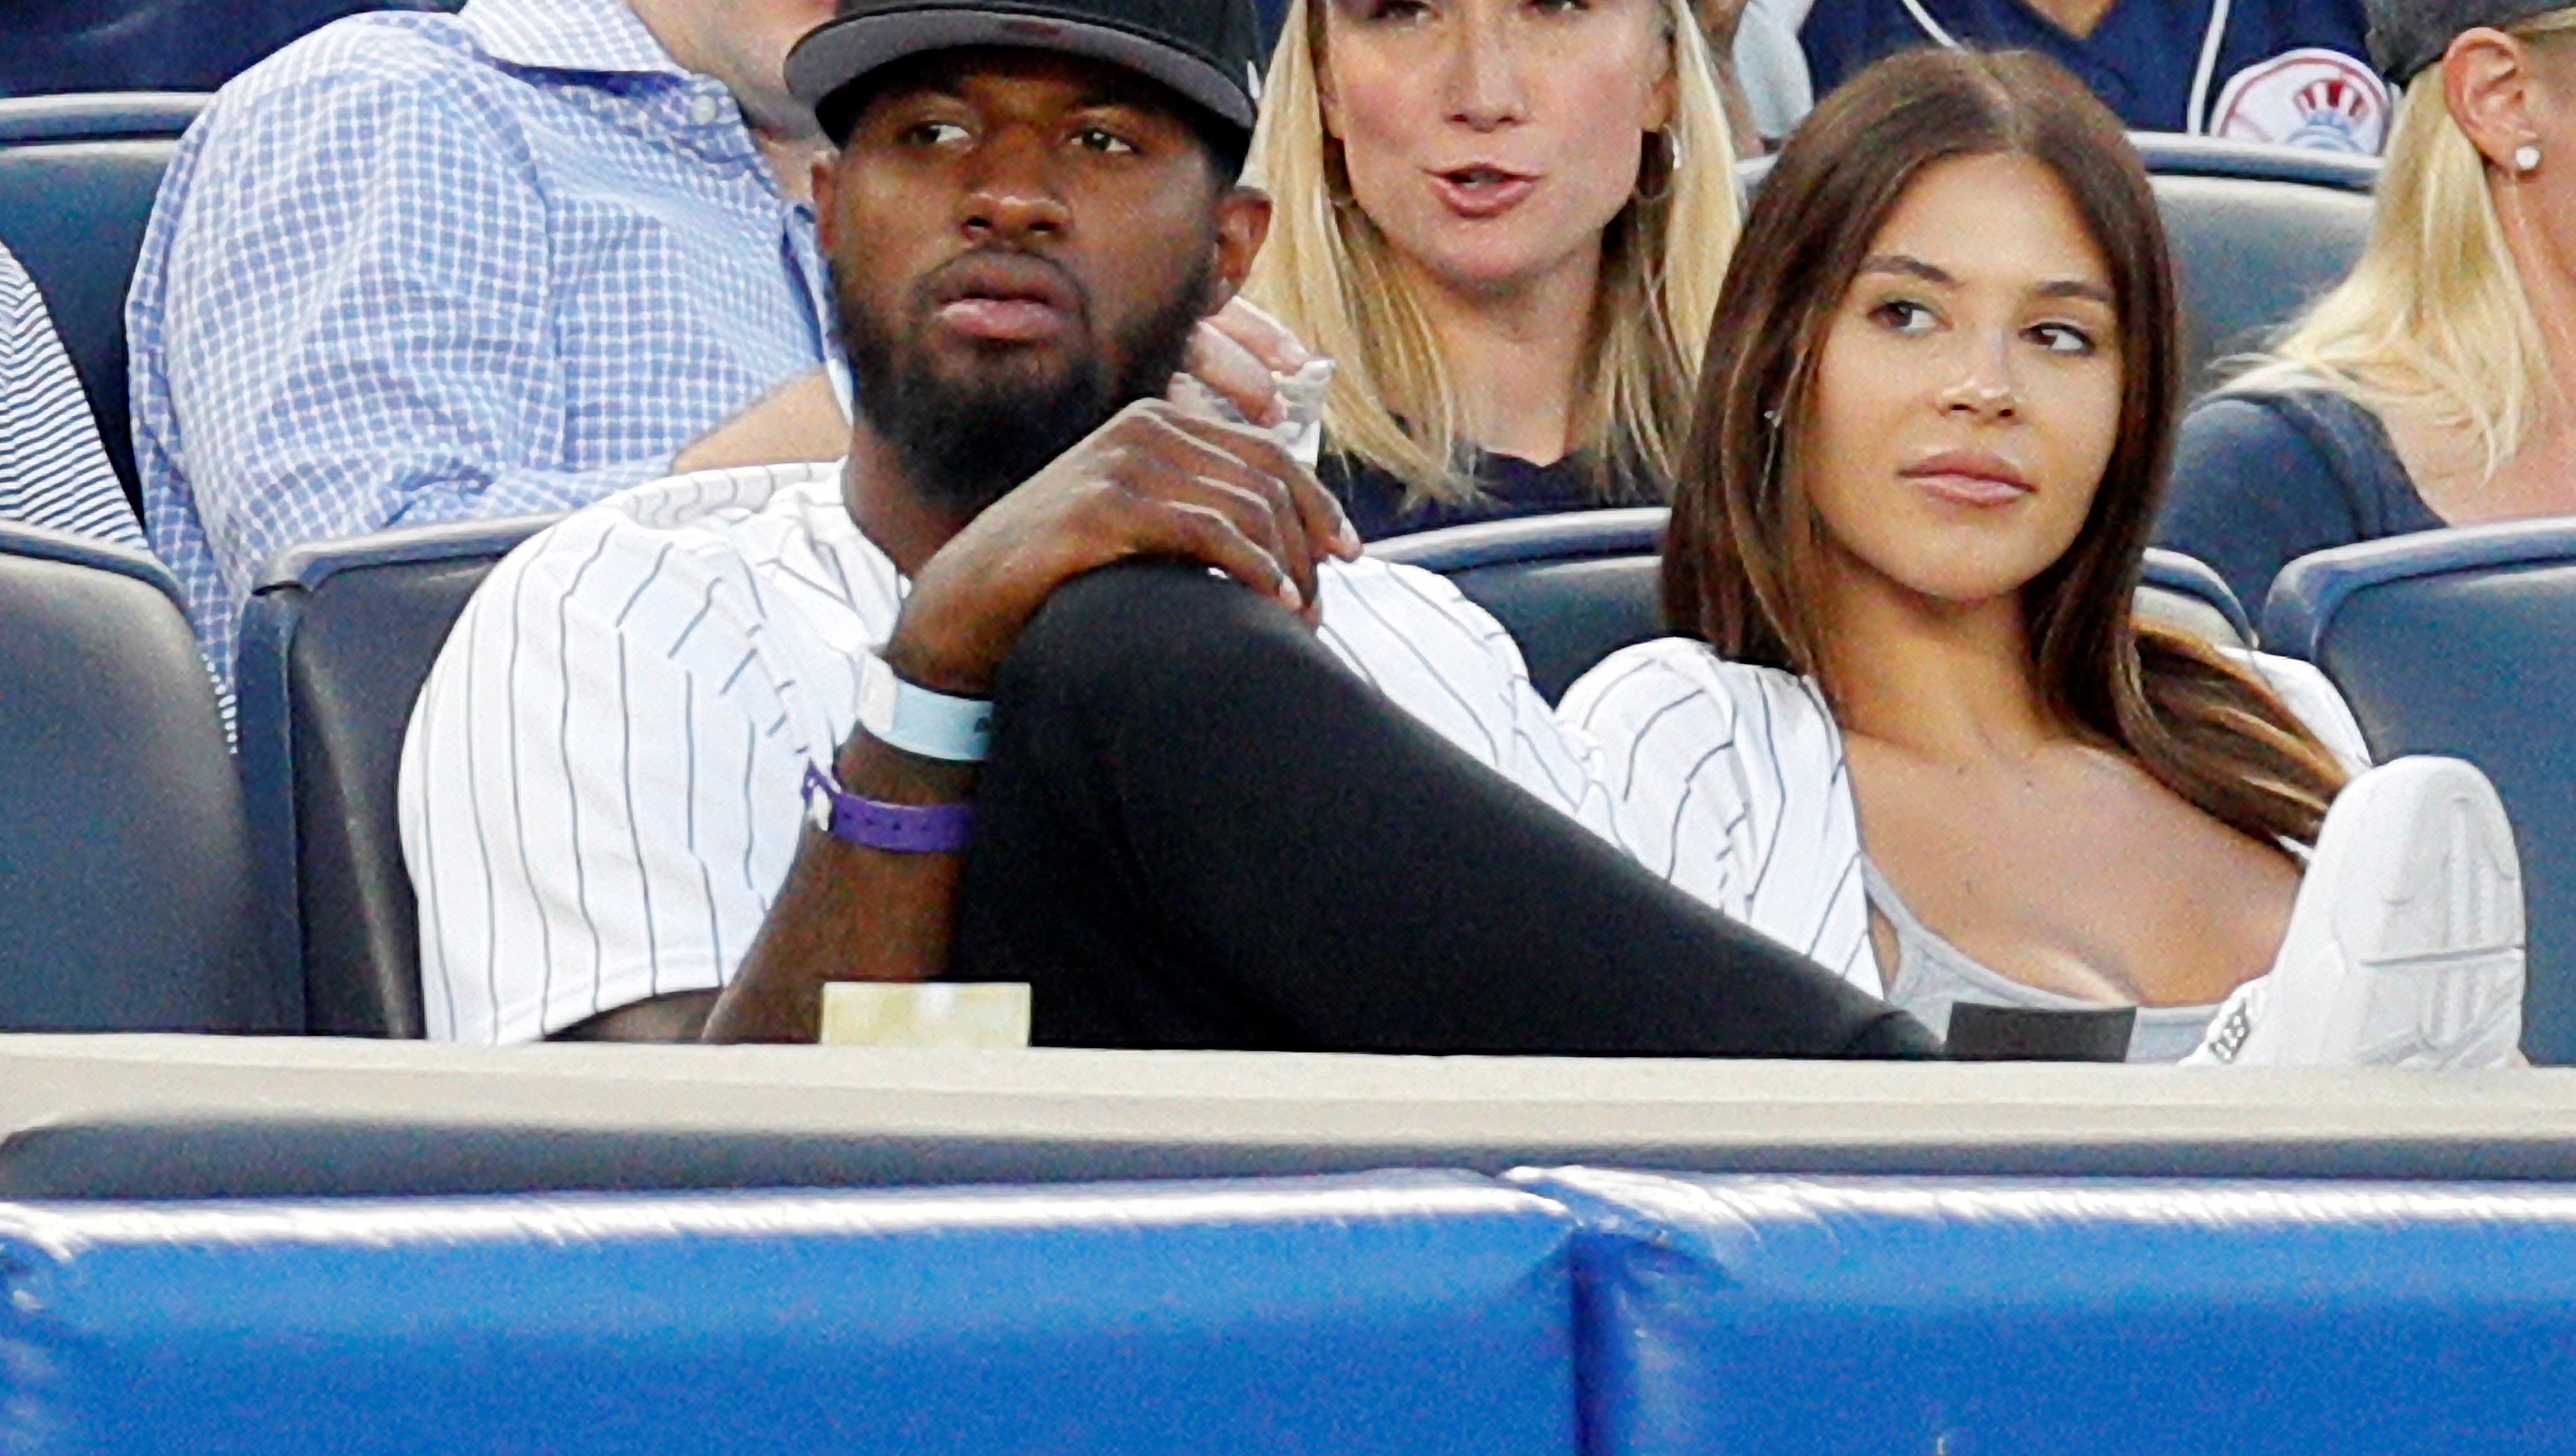 Paul George and Daniela Rajic sitting in the stands watching a baseball game between the Detroit Tigers and the New York Yankees